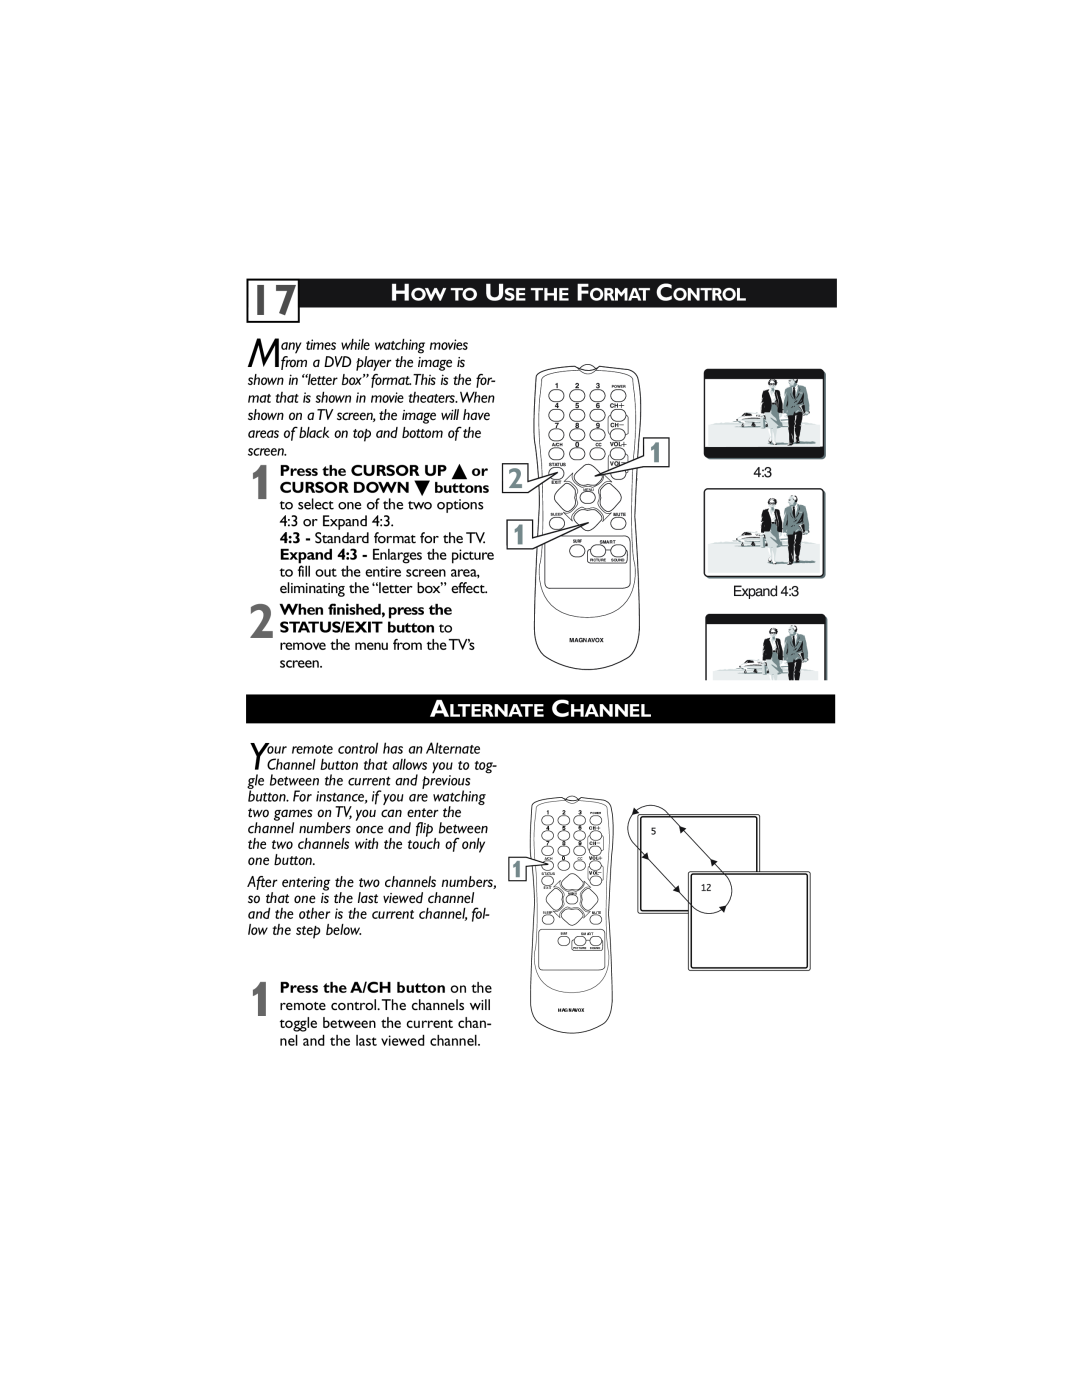 Magnavox 32MT3305/17 user manual How To Use The Format Control, Alternate Channel, remove the menu from the TV’s screen 